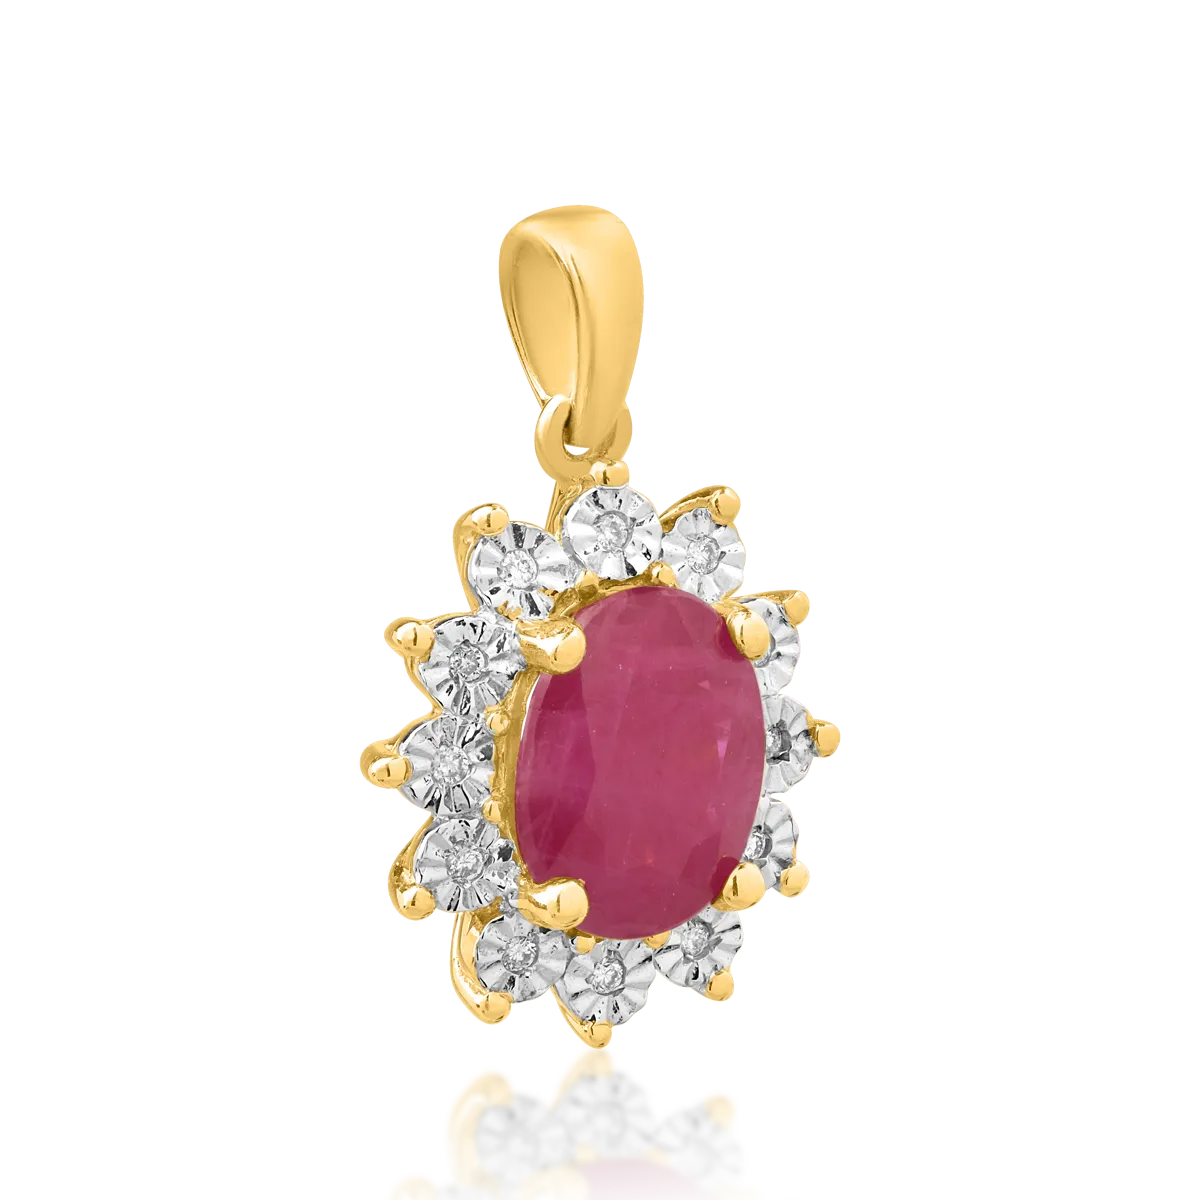 14K yellow gold pendant with 1.33ct ruby and 0.03ct diamonds